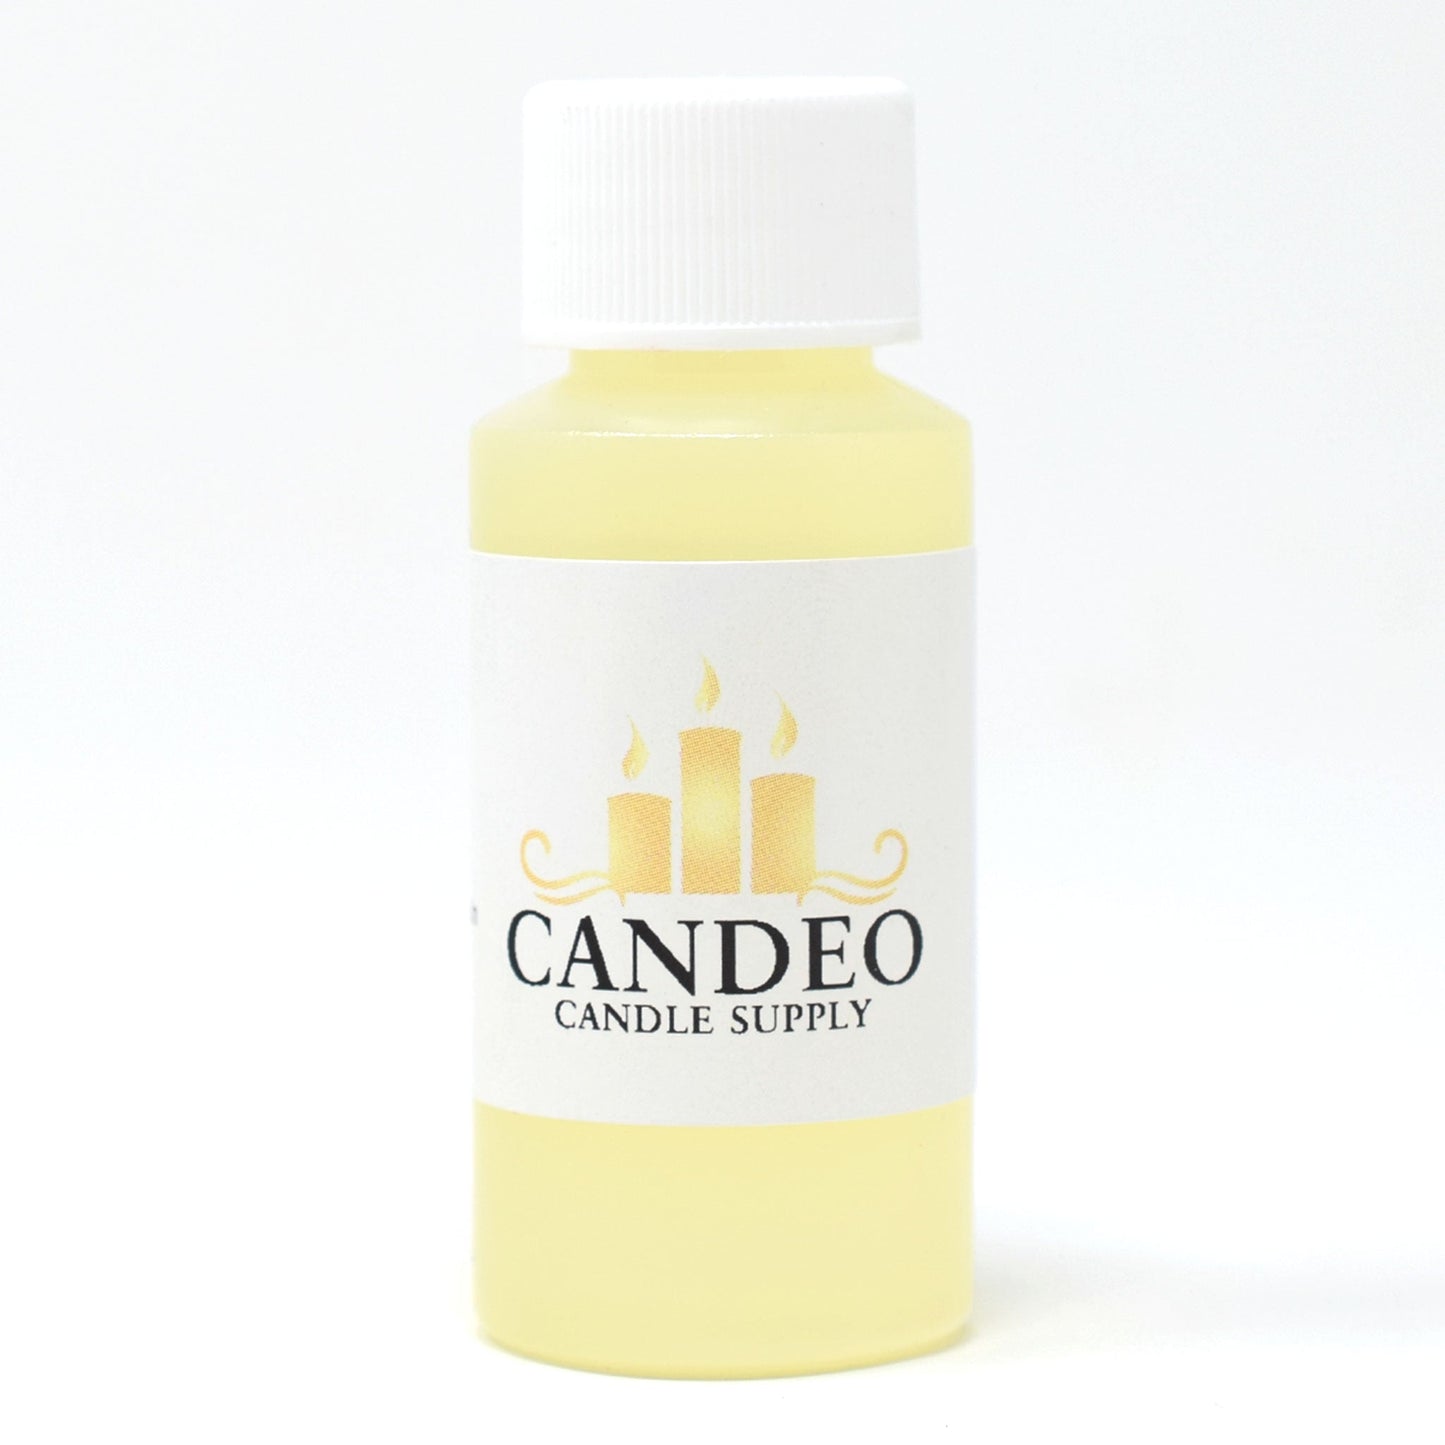 Mahogany Balsam Fragrance Oil - Candeo Candle Supply